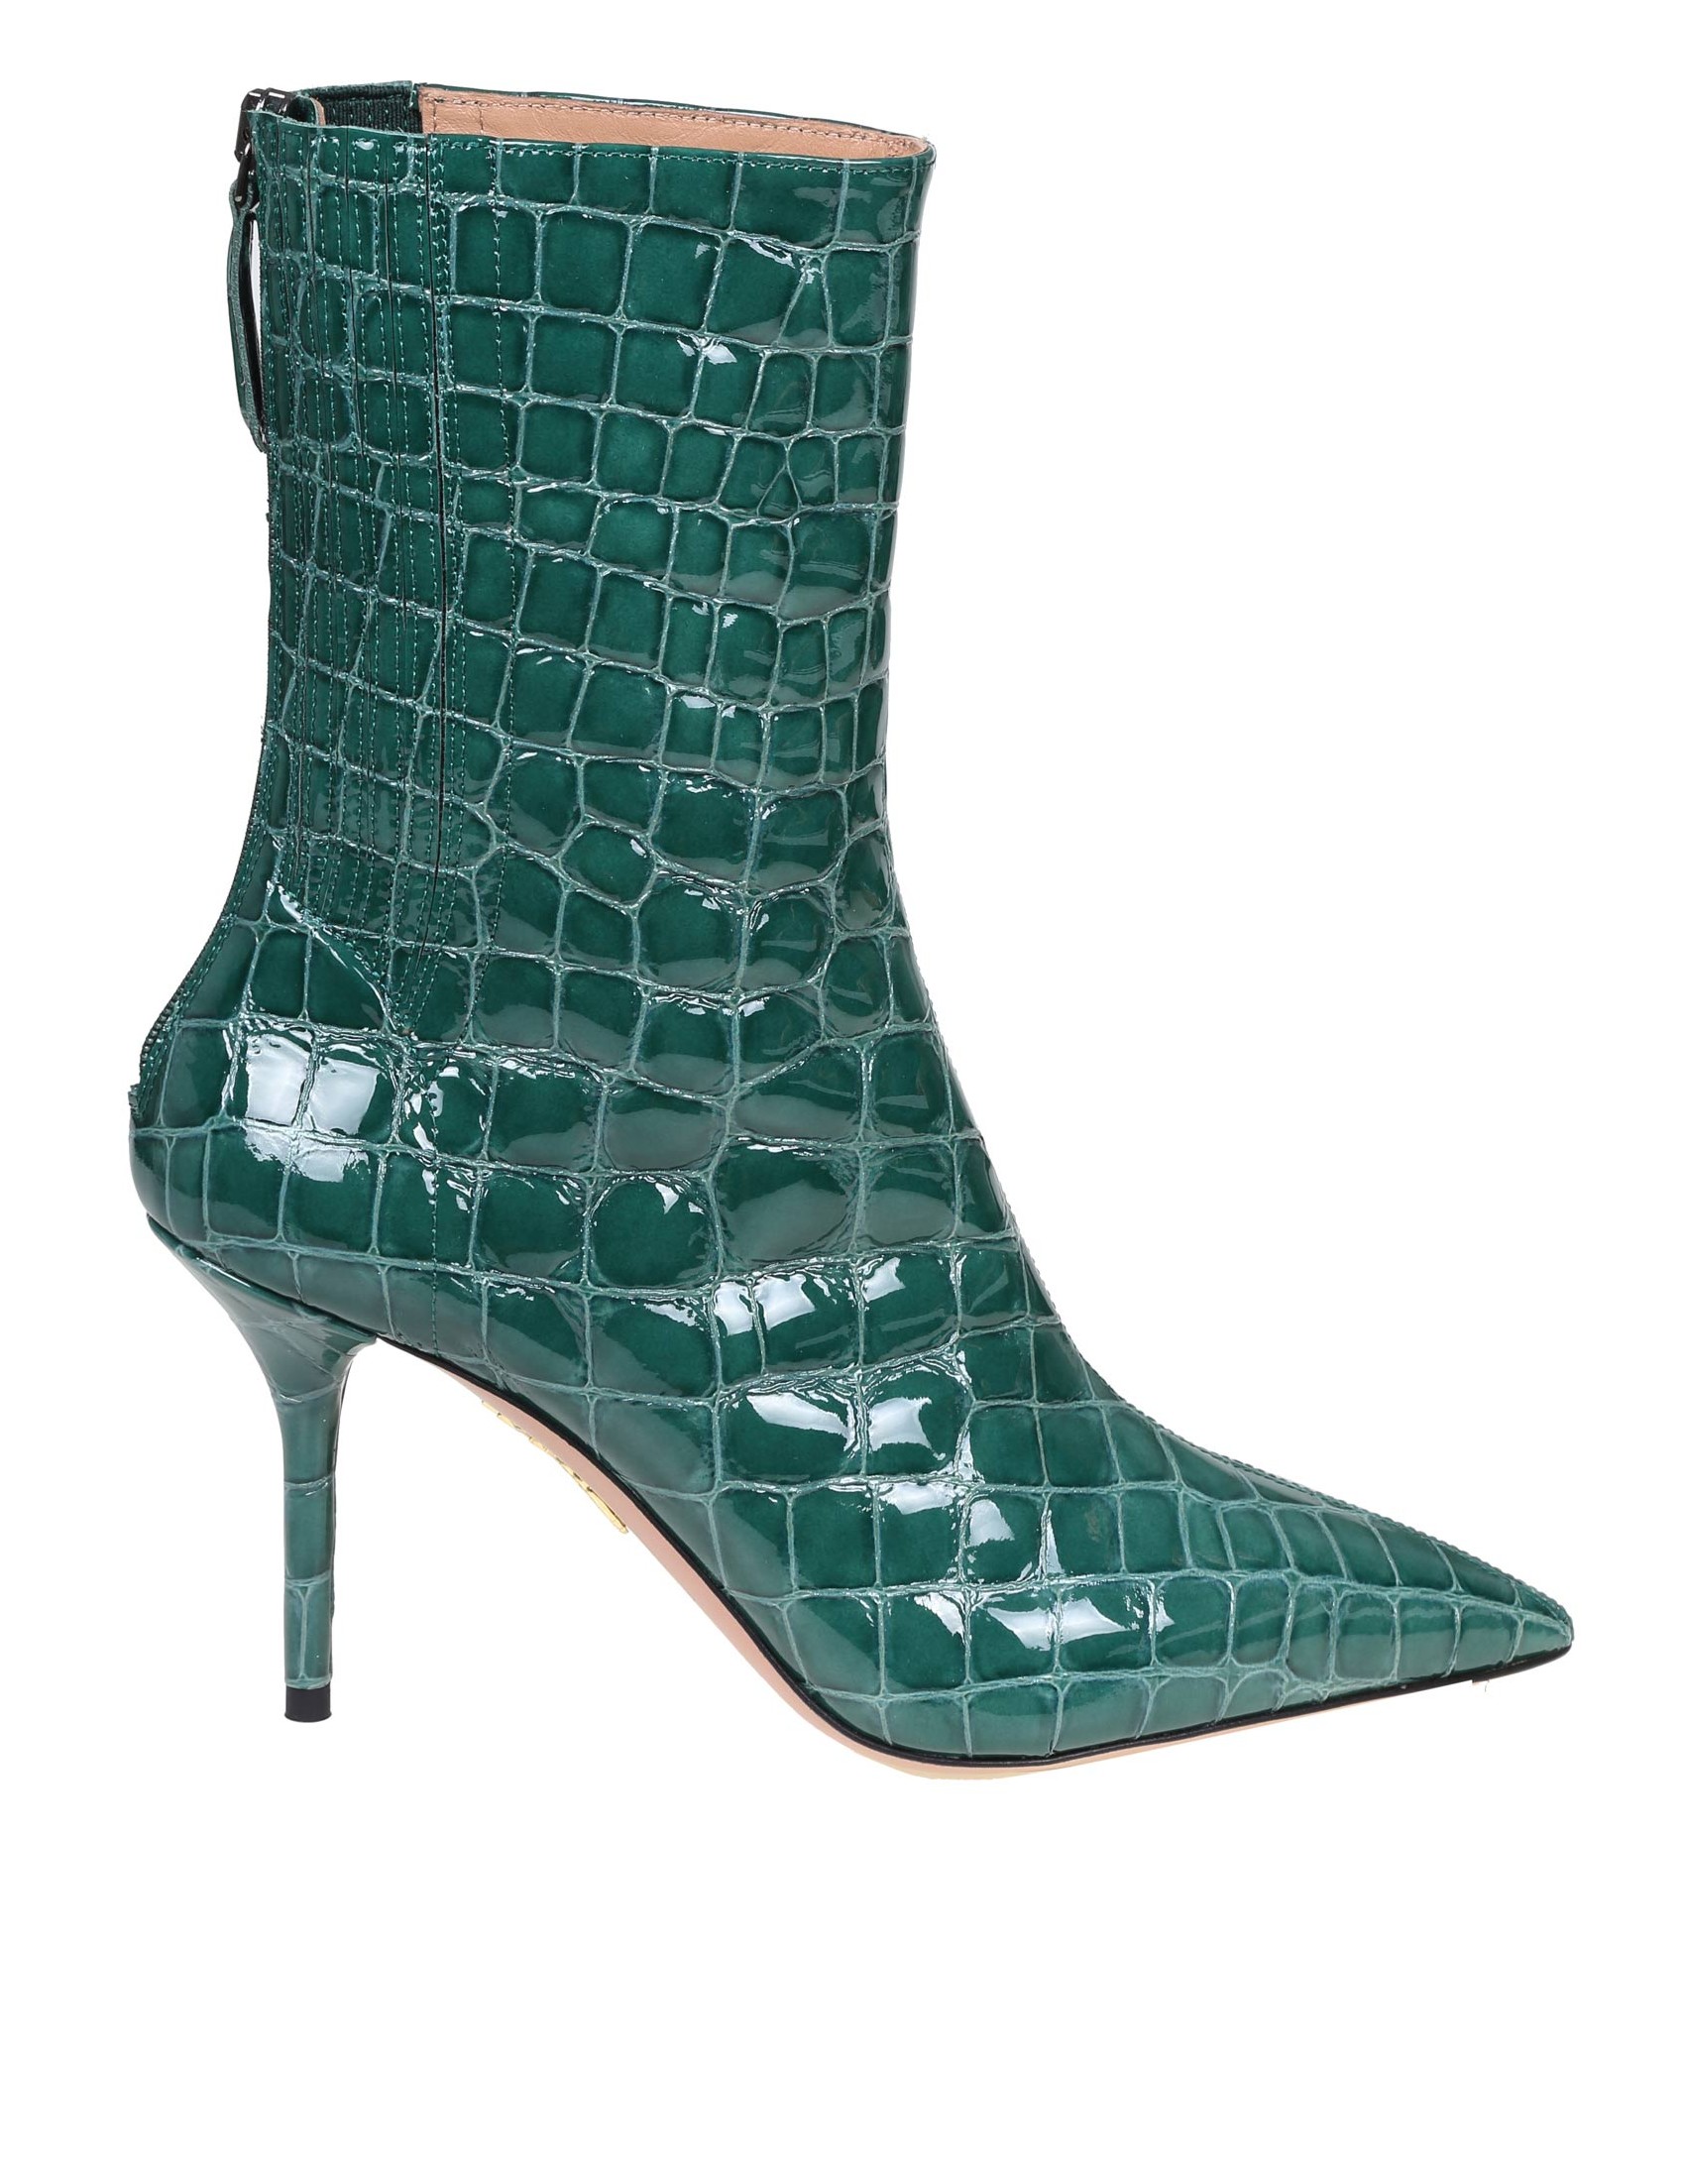 AQUAZZURA SAINT HONORE' ANKLE BOOT IN GREEN LEATHER